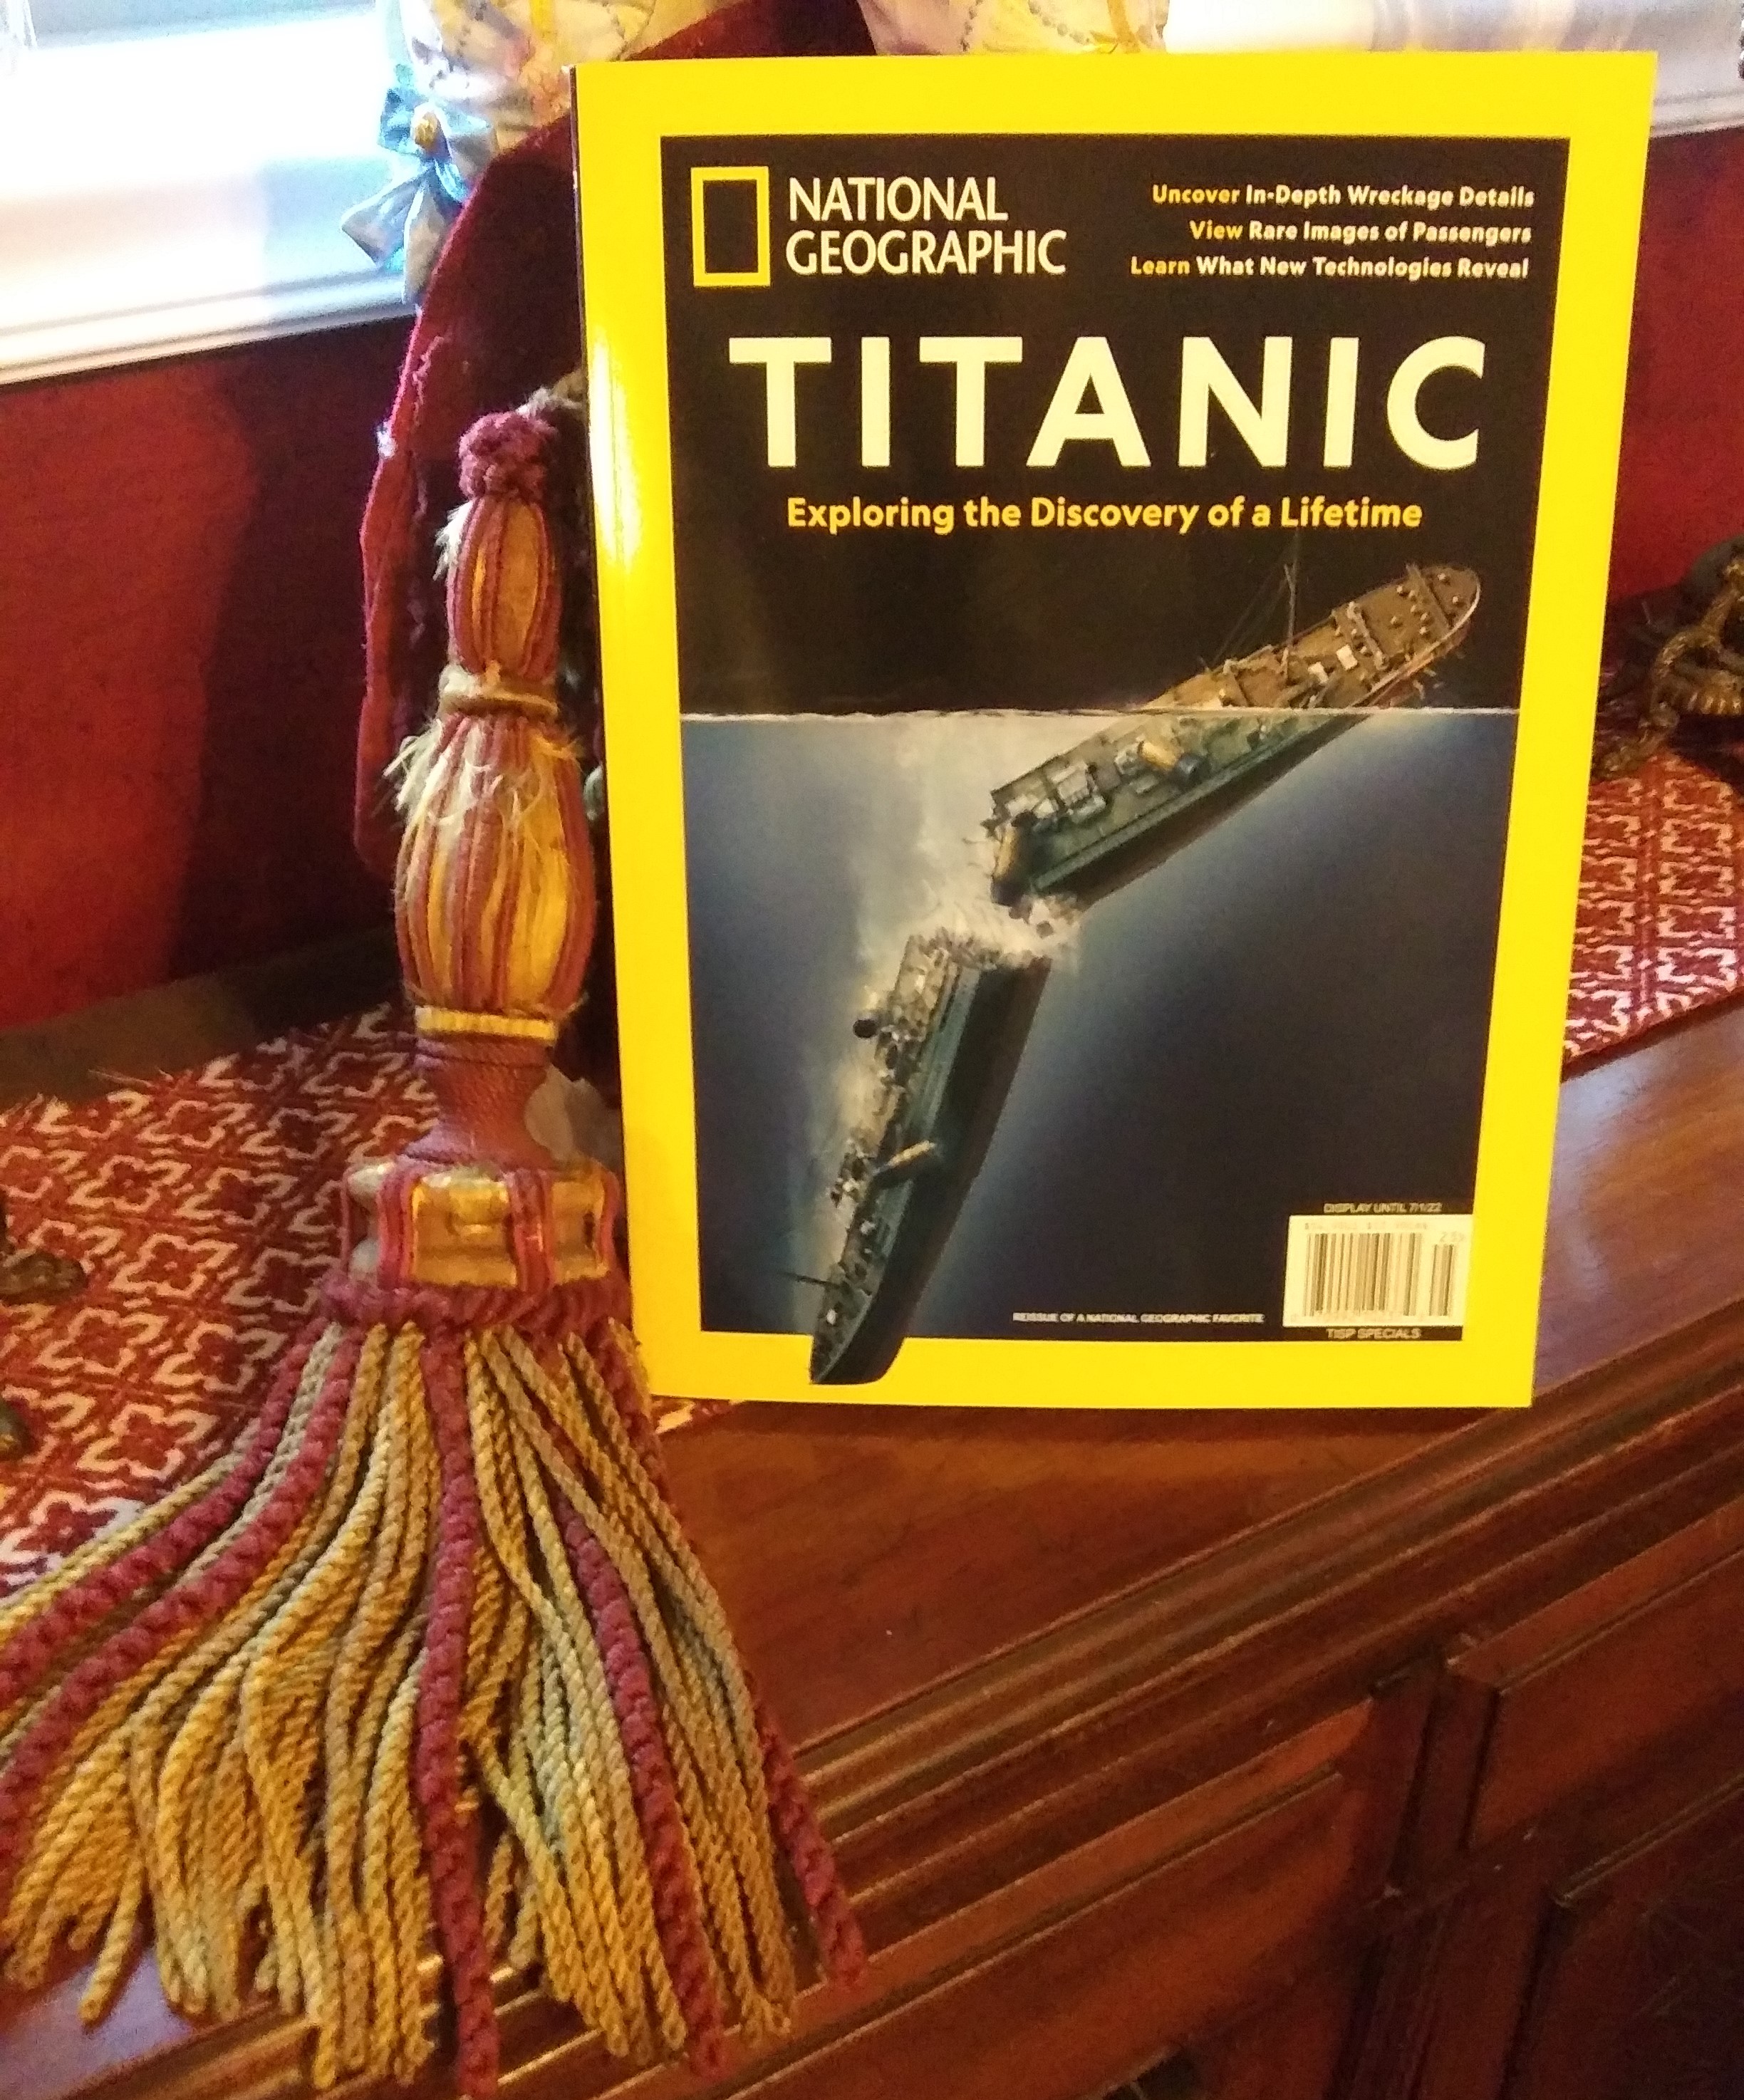 DISPATCHES FROM HOME – 131 + 43 + 4+1 = 179 Titanic memories.